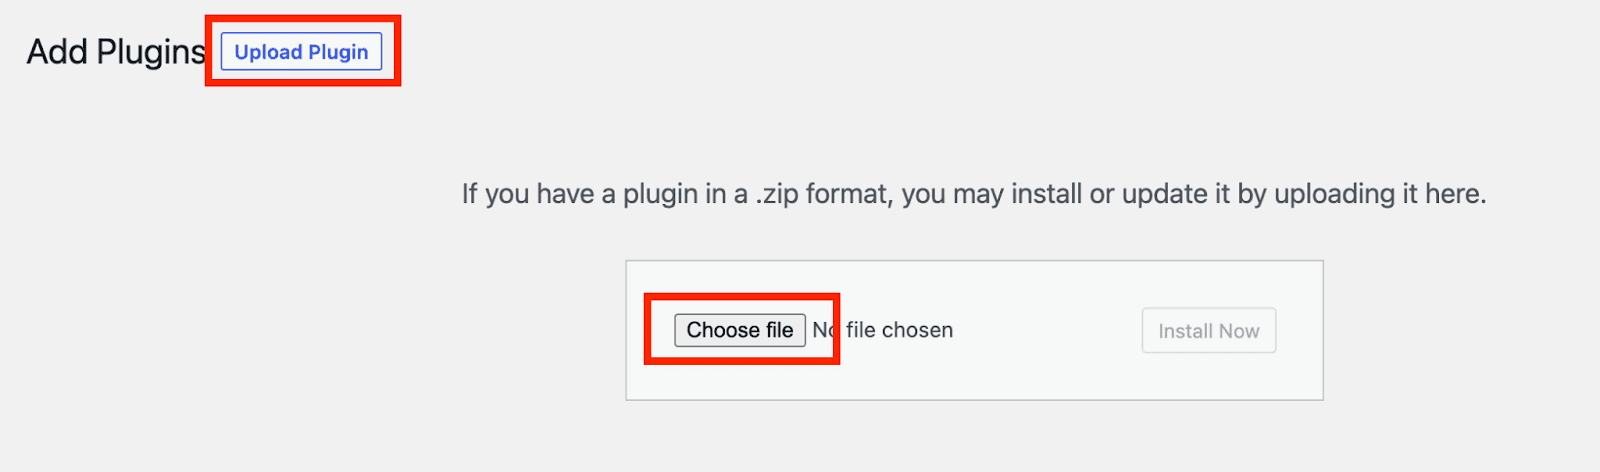 Upload your .zip file, install, and activate the plugin